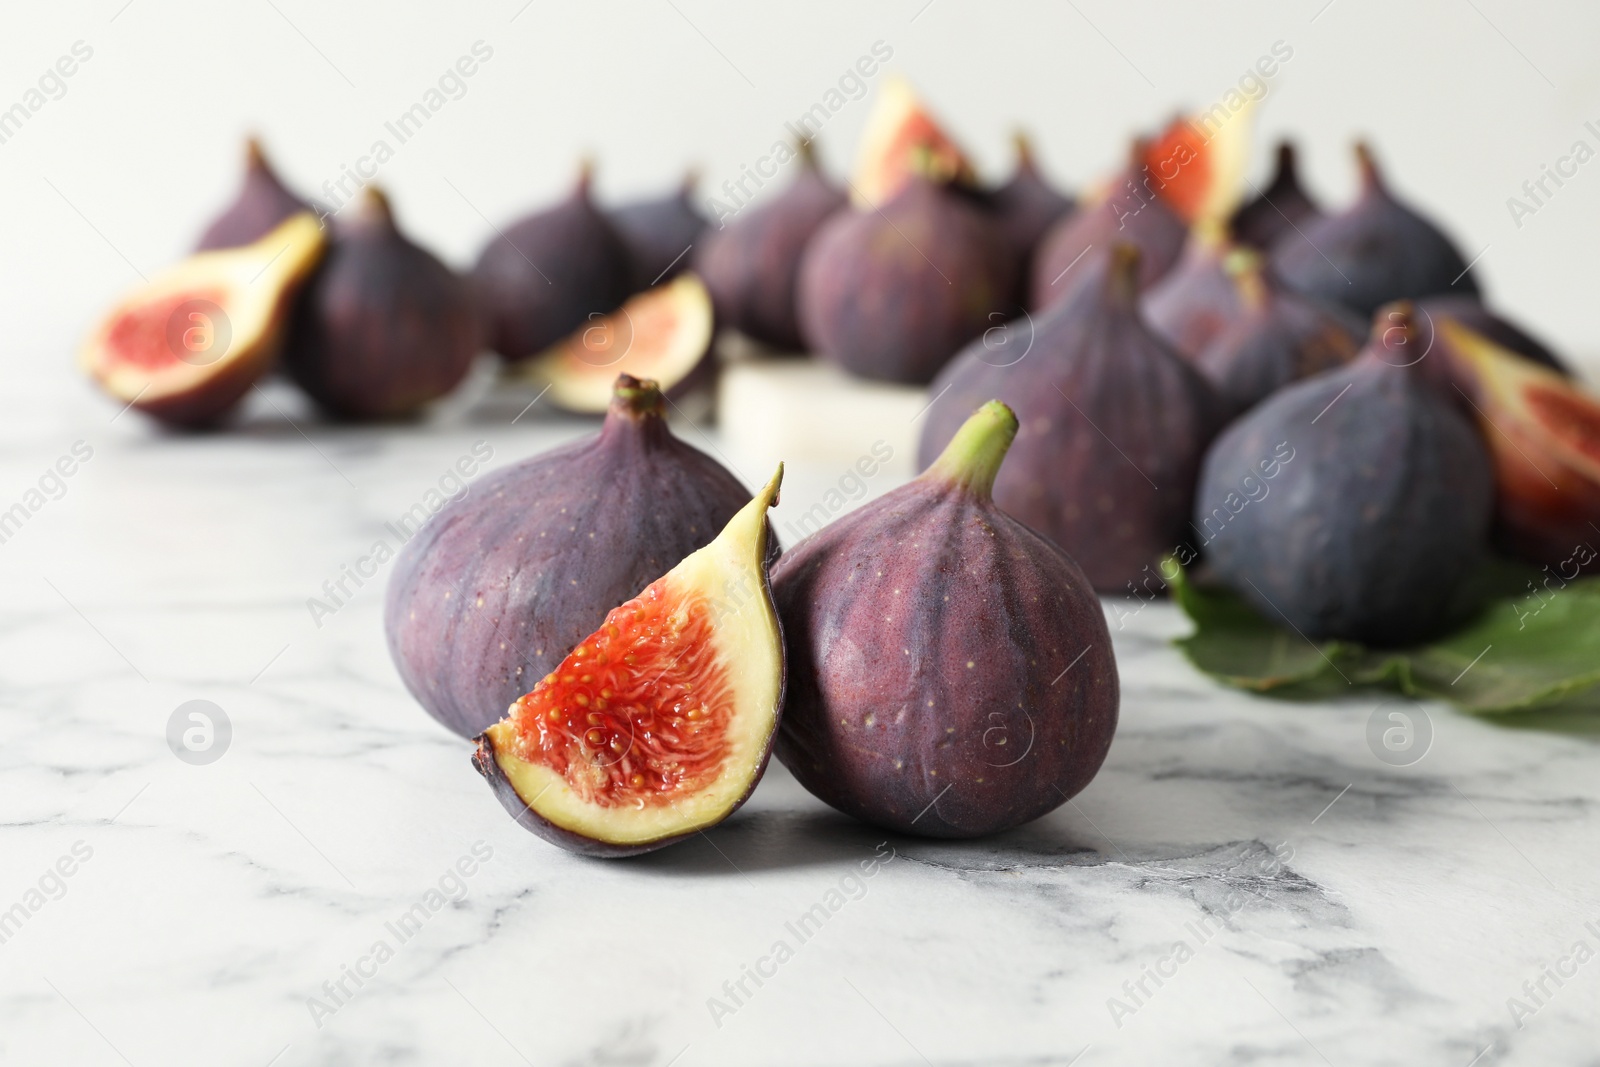 Photo of Whole and cut tasty fresh figs on white marble table